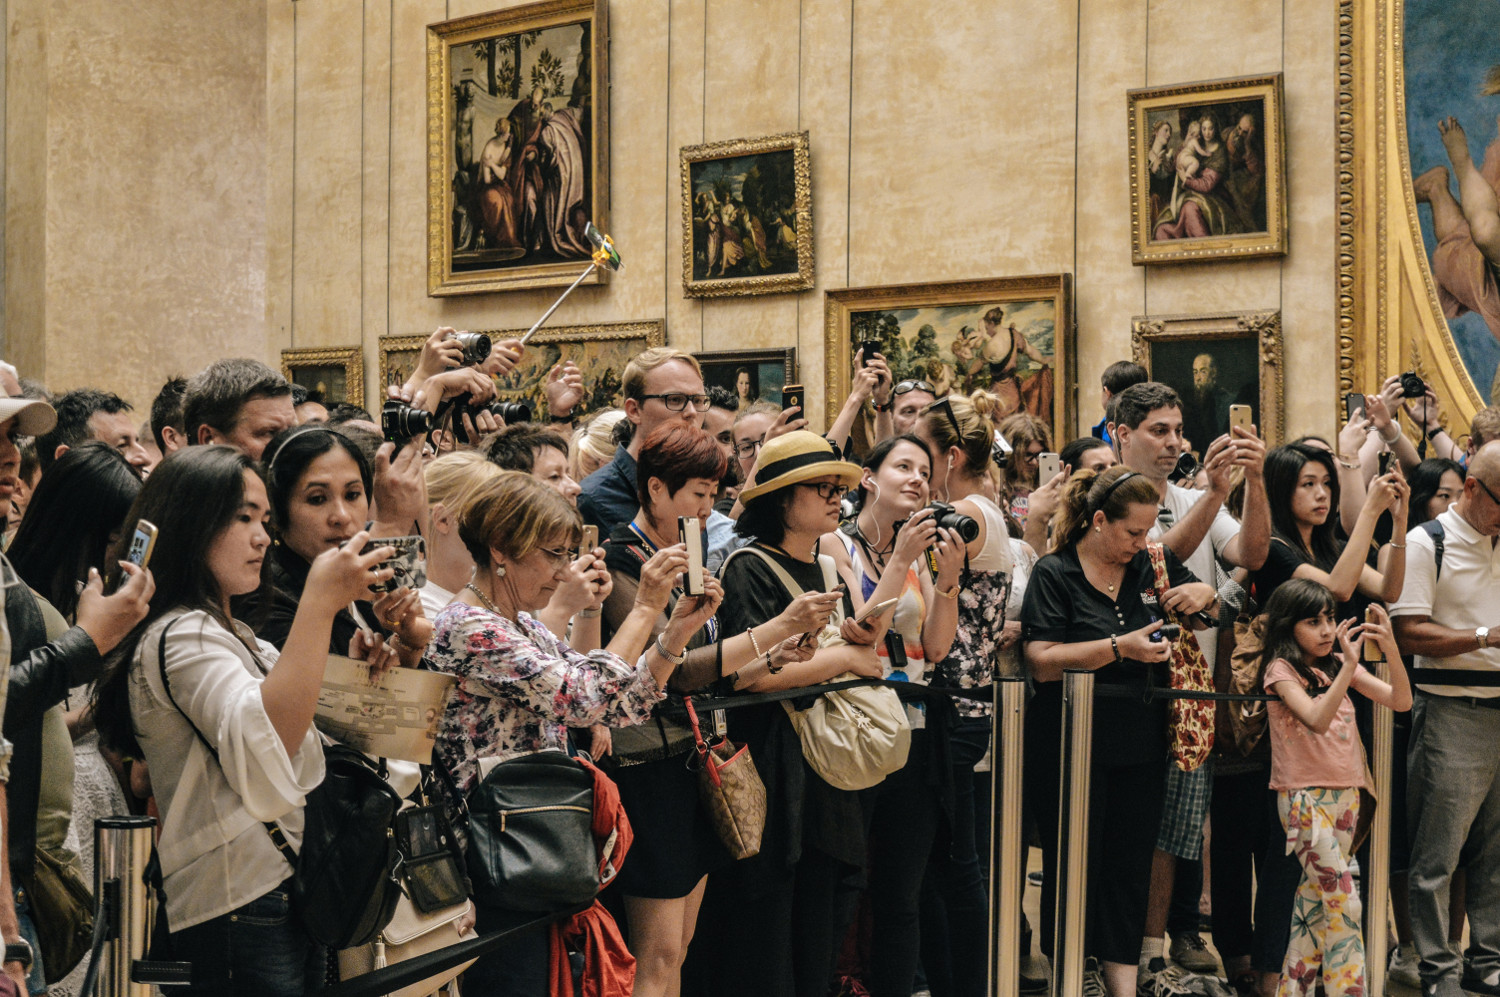 © Image: Alicia Steels A large group of tourists stand behind a rope fence inside a museum to take photos of something outside of the picture.